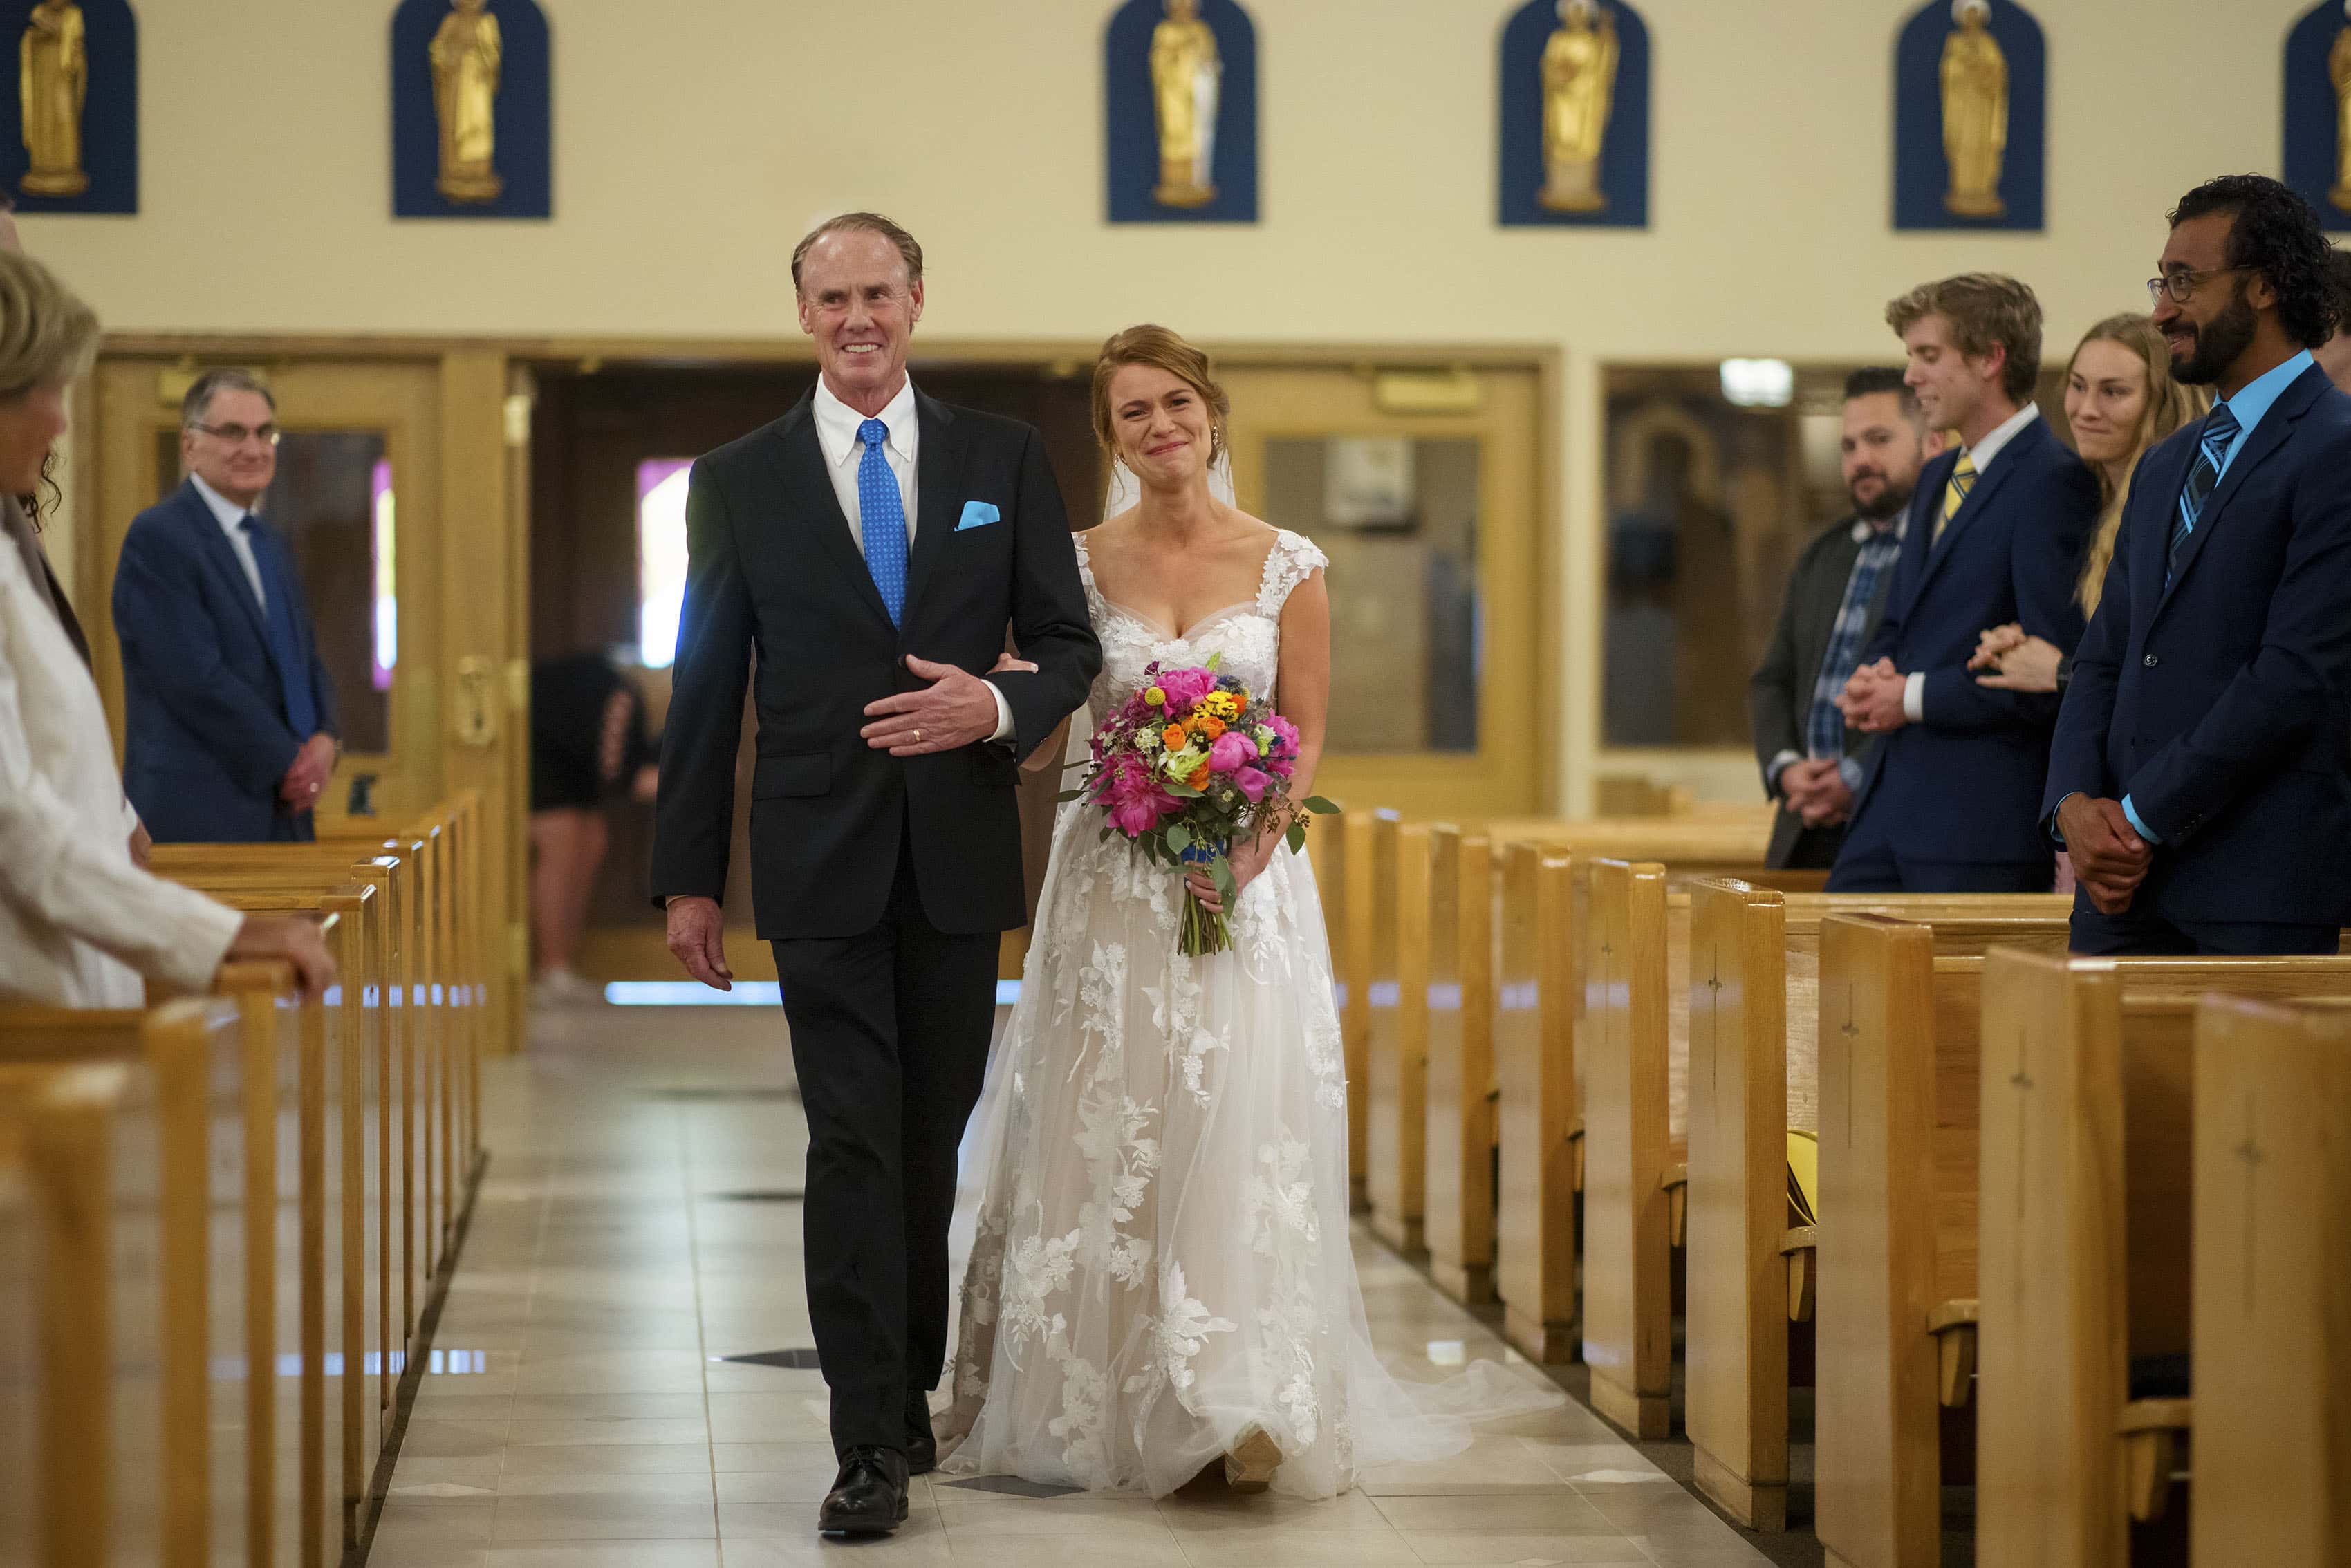 The bride walks down the aisle with her father at Holy Name Catholic Church